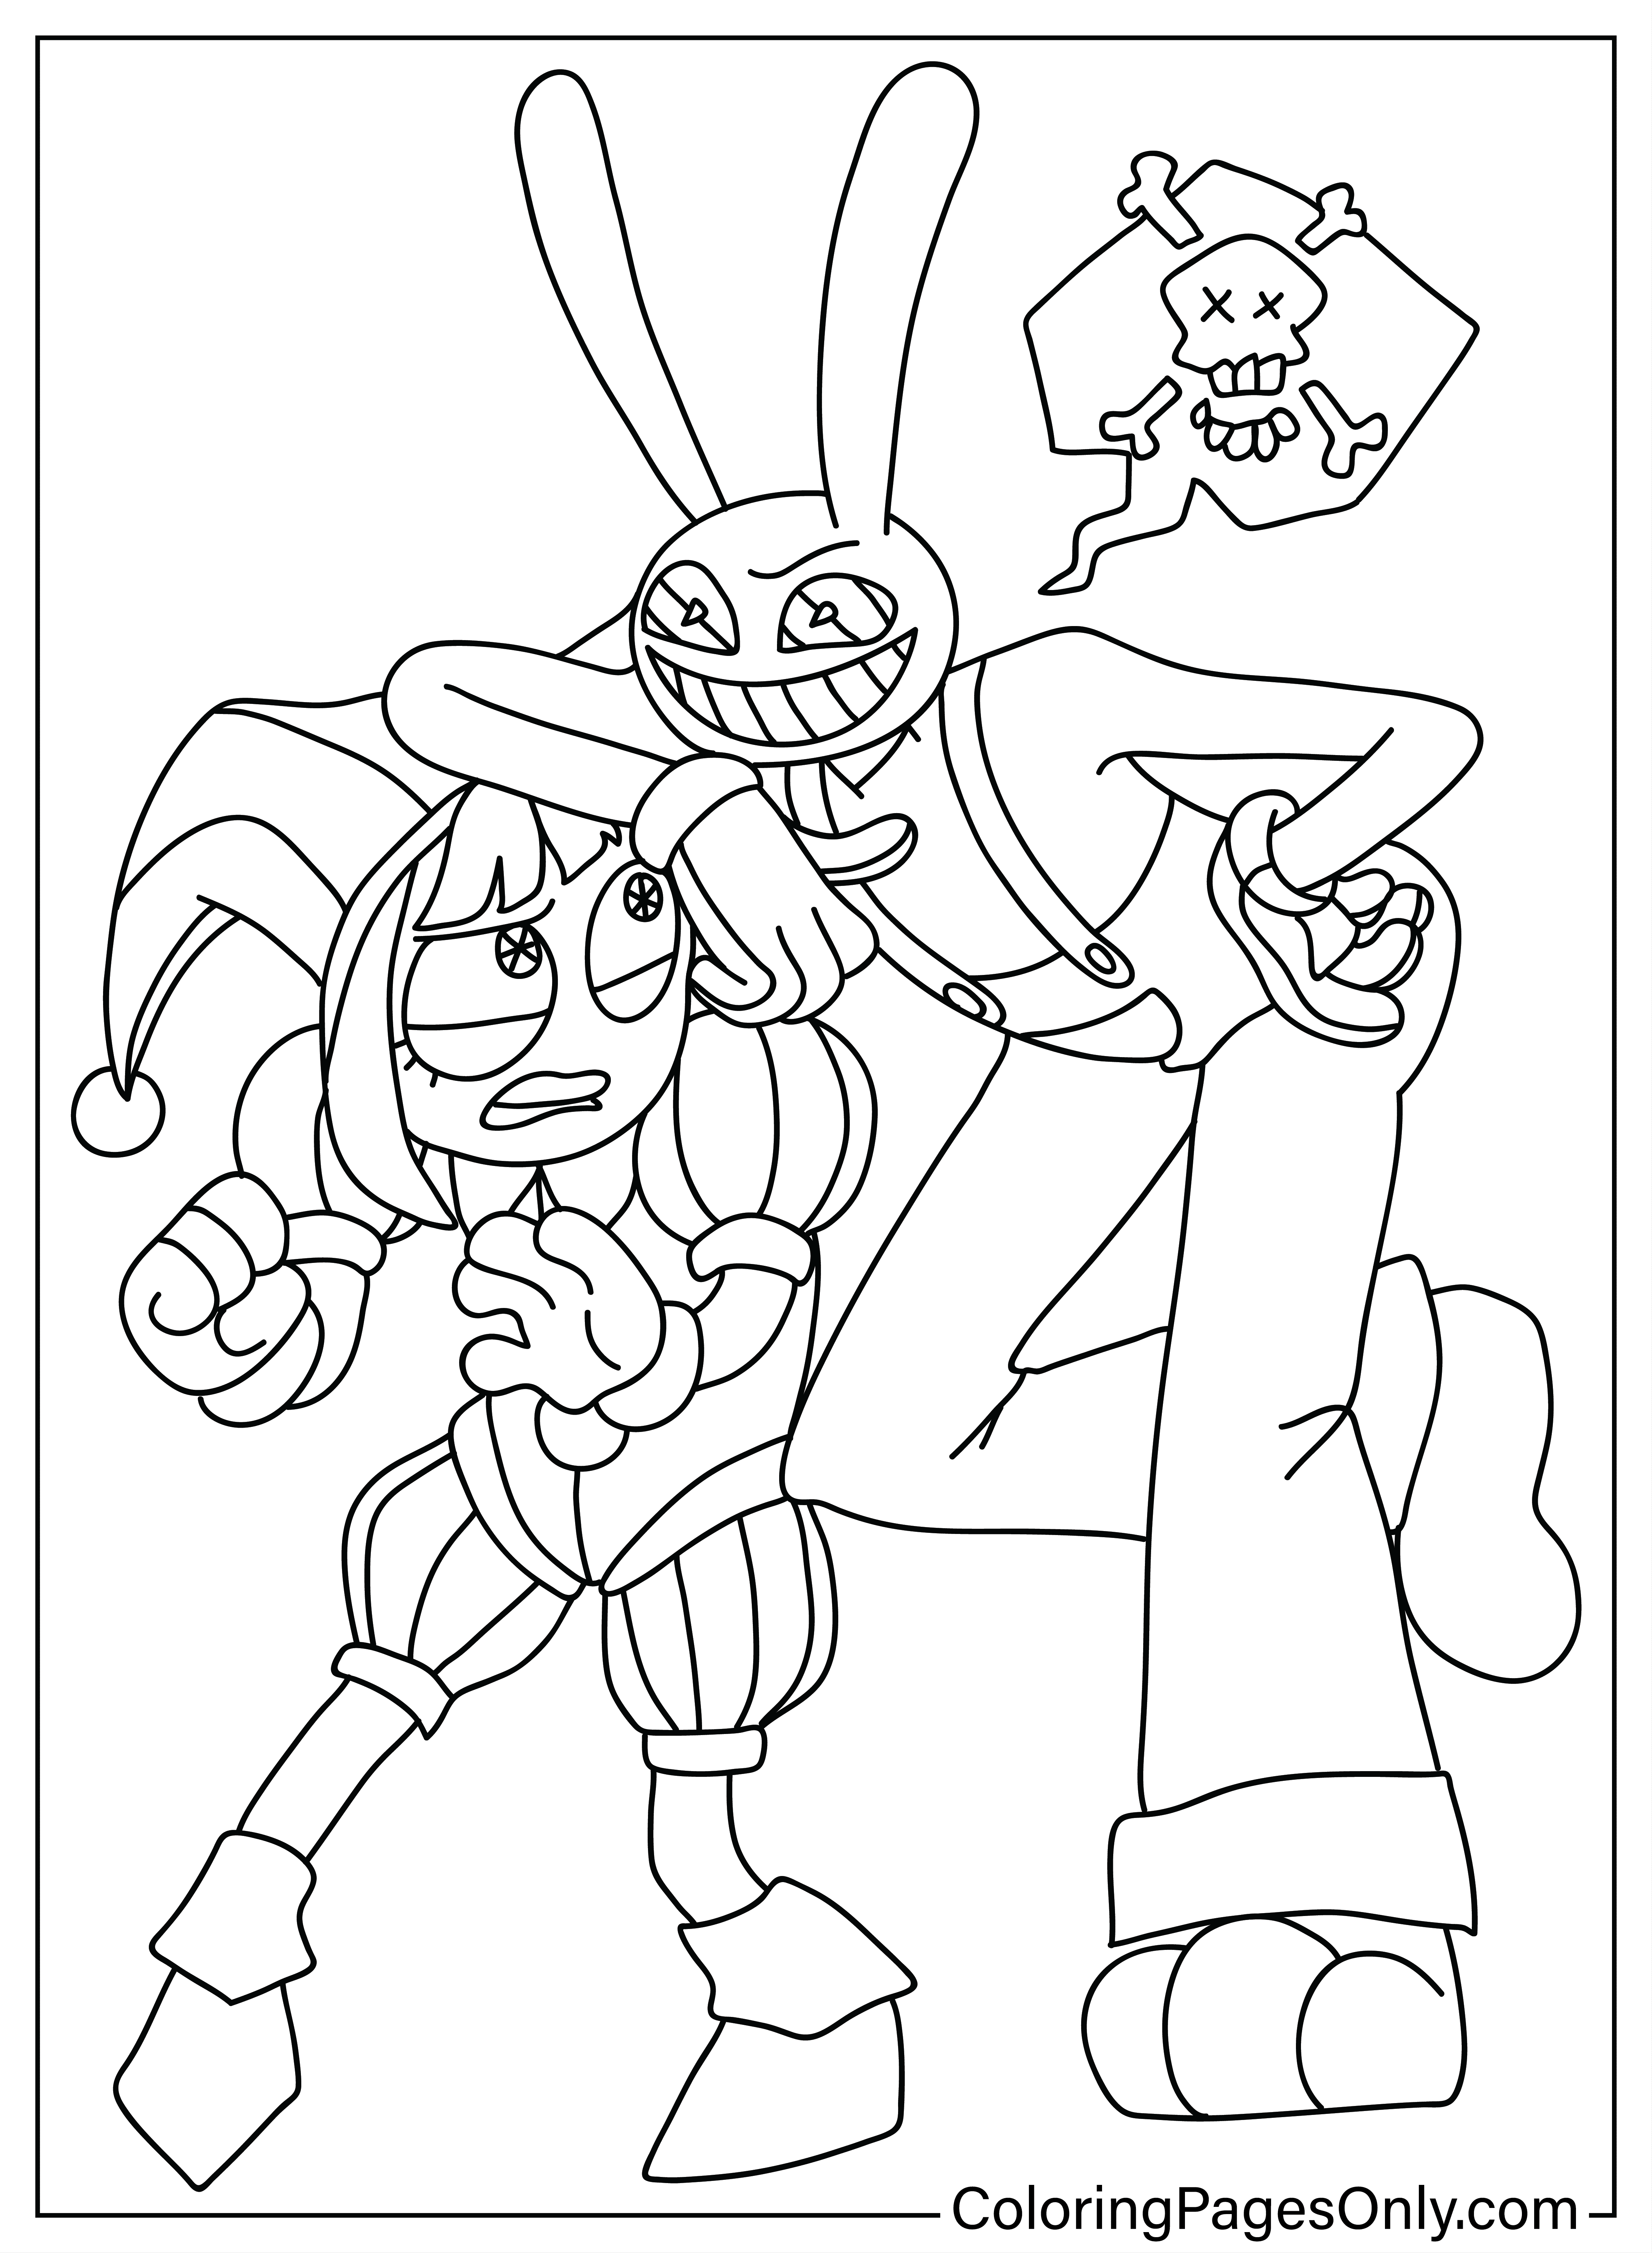 Pomni and Jax Coloring Page from Jax